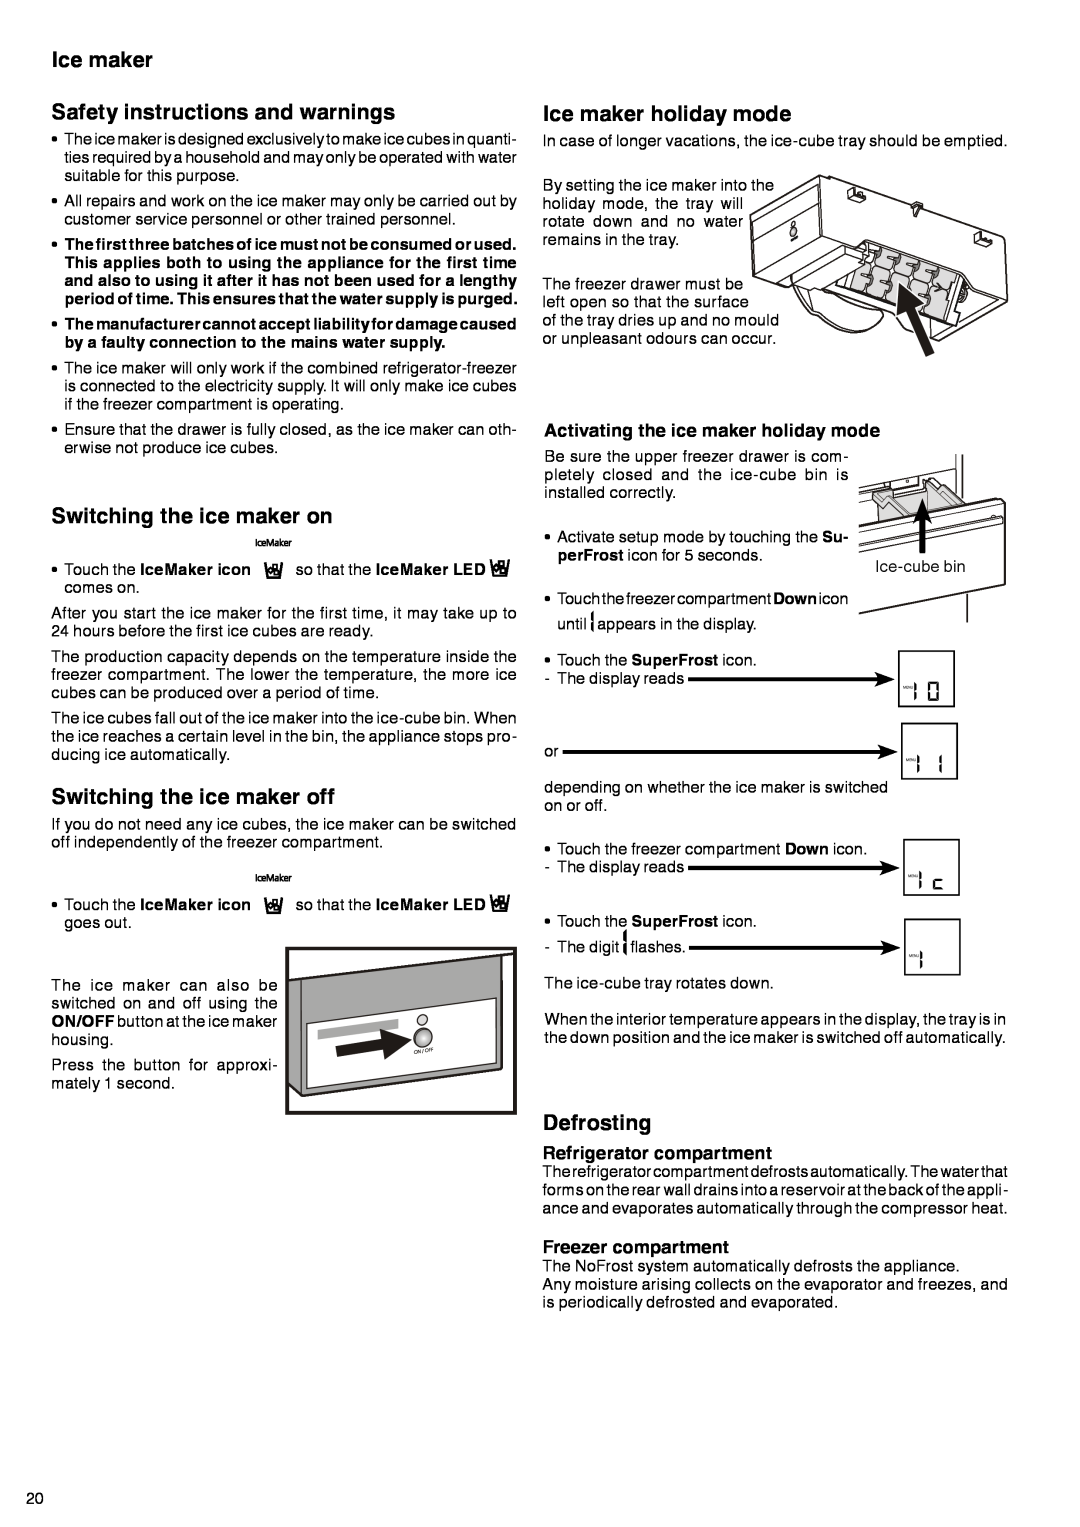 Liebherr 7082 135-00 Ice maker Safety instructions and warnings, Switching the ice maker on, Switching the ice maker off 